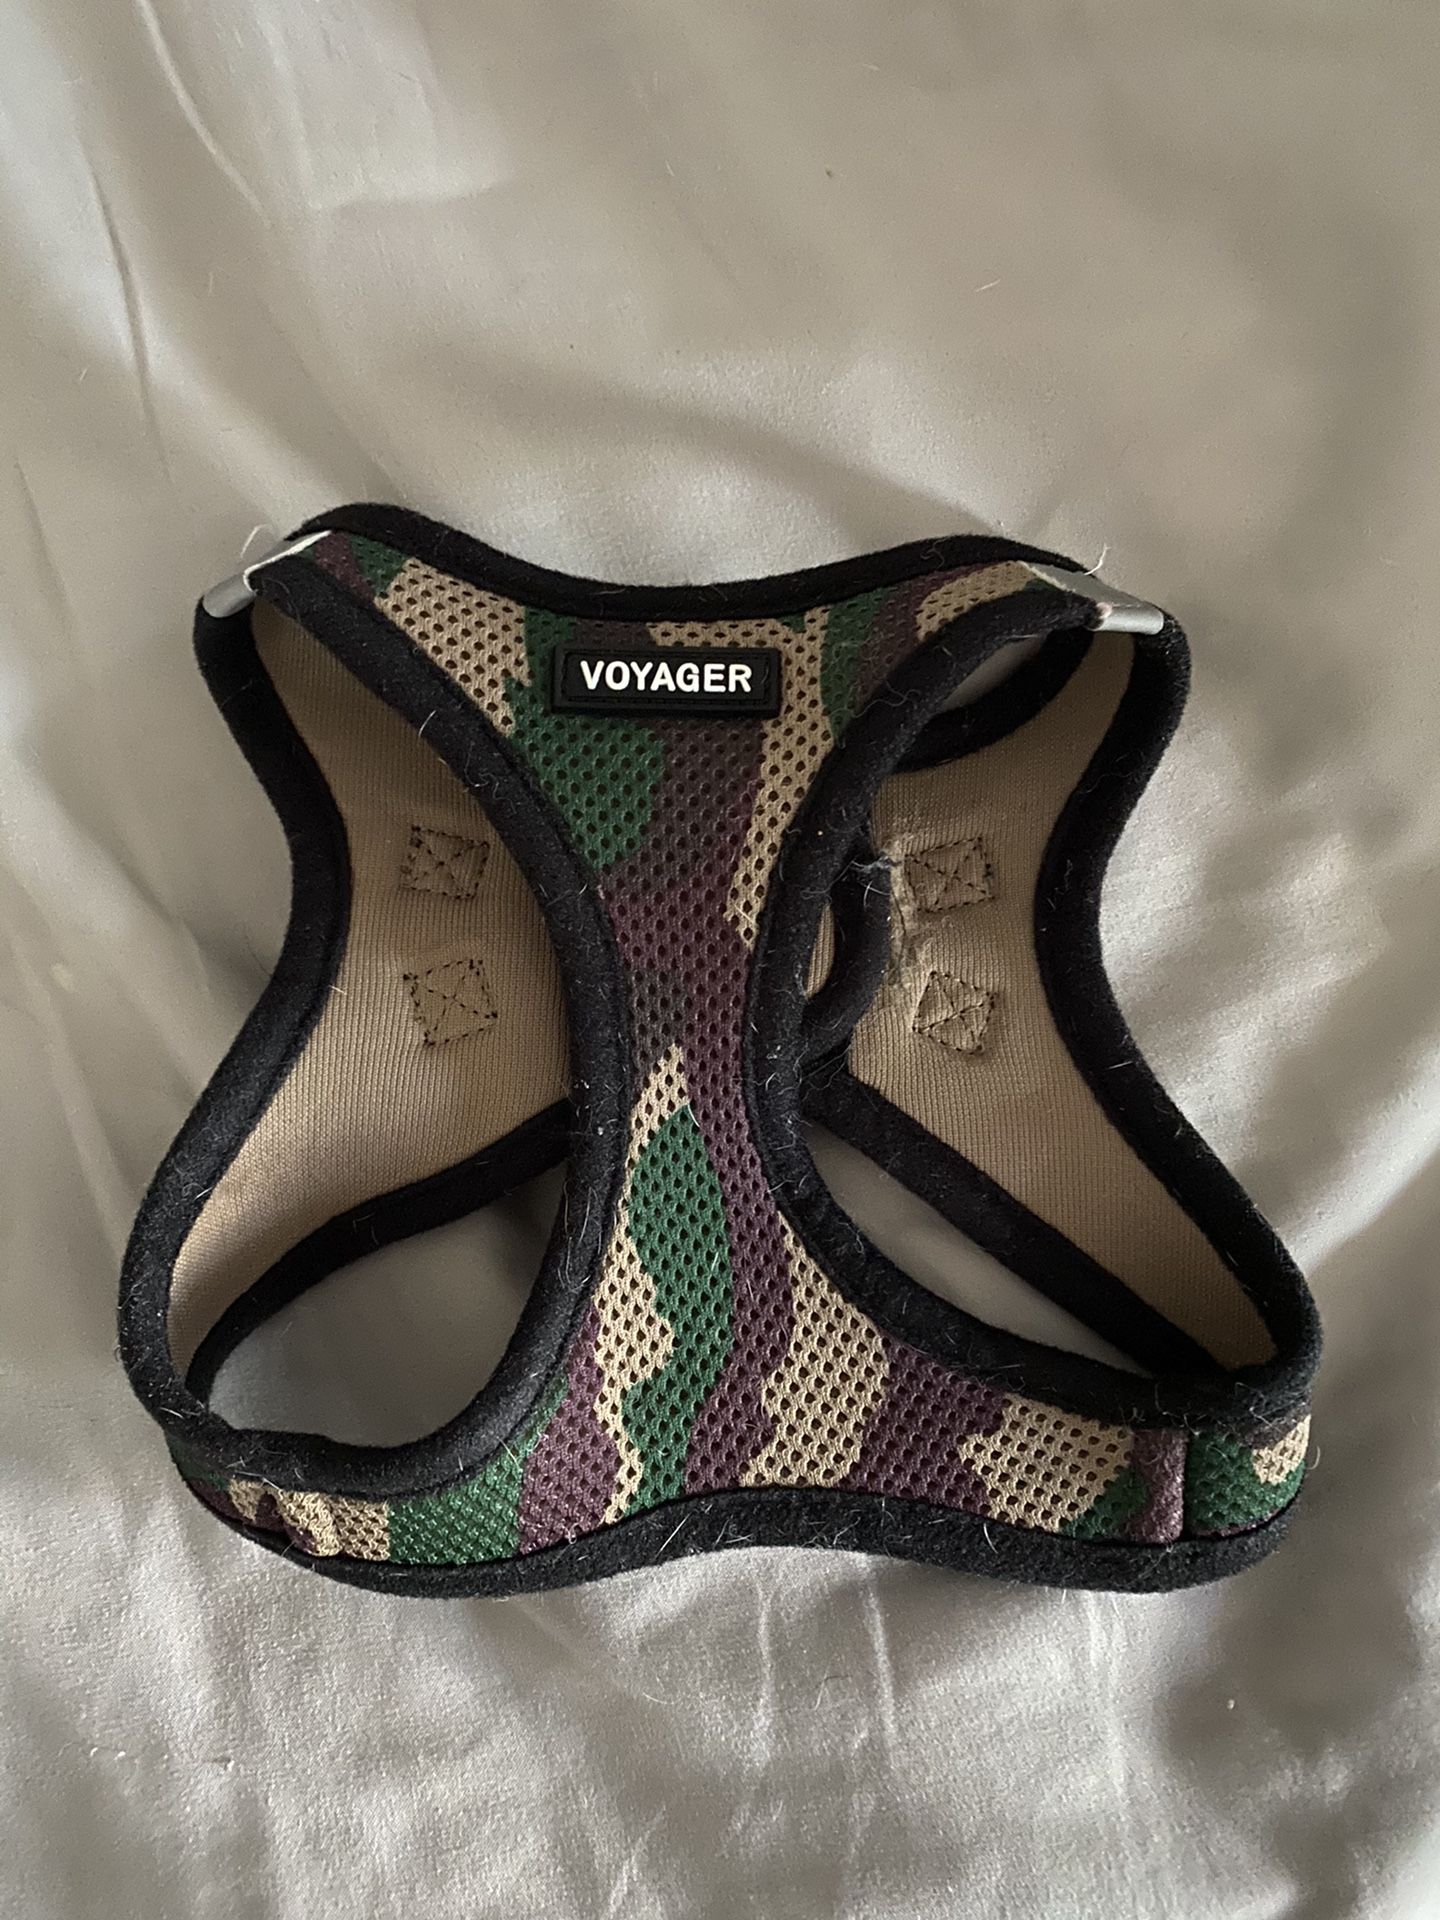 Voyager Dog Harness Camo